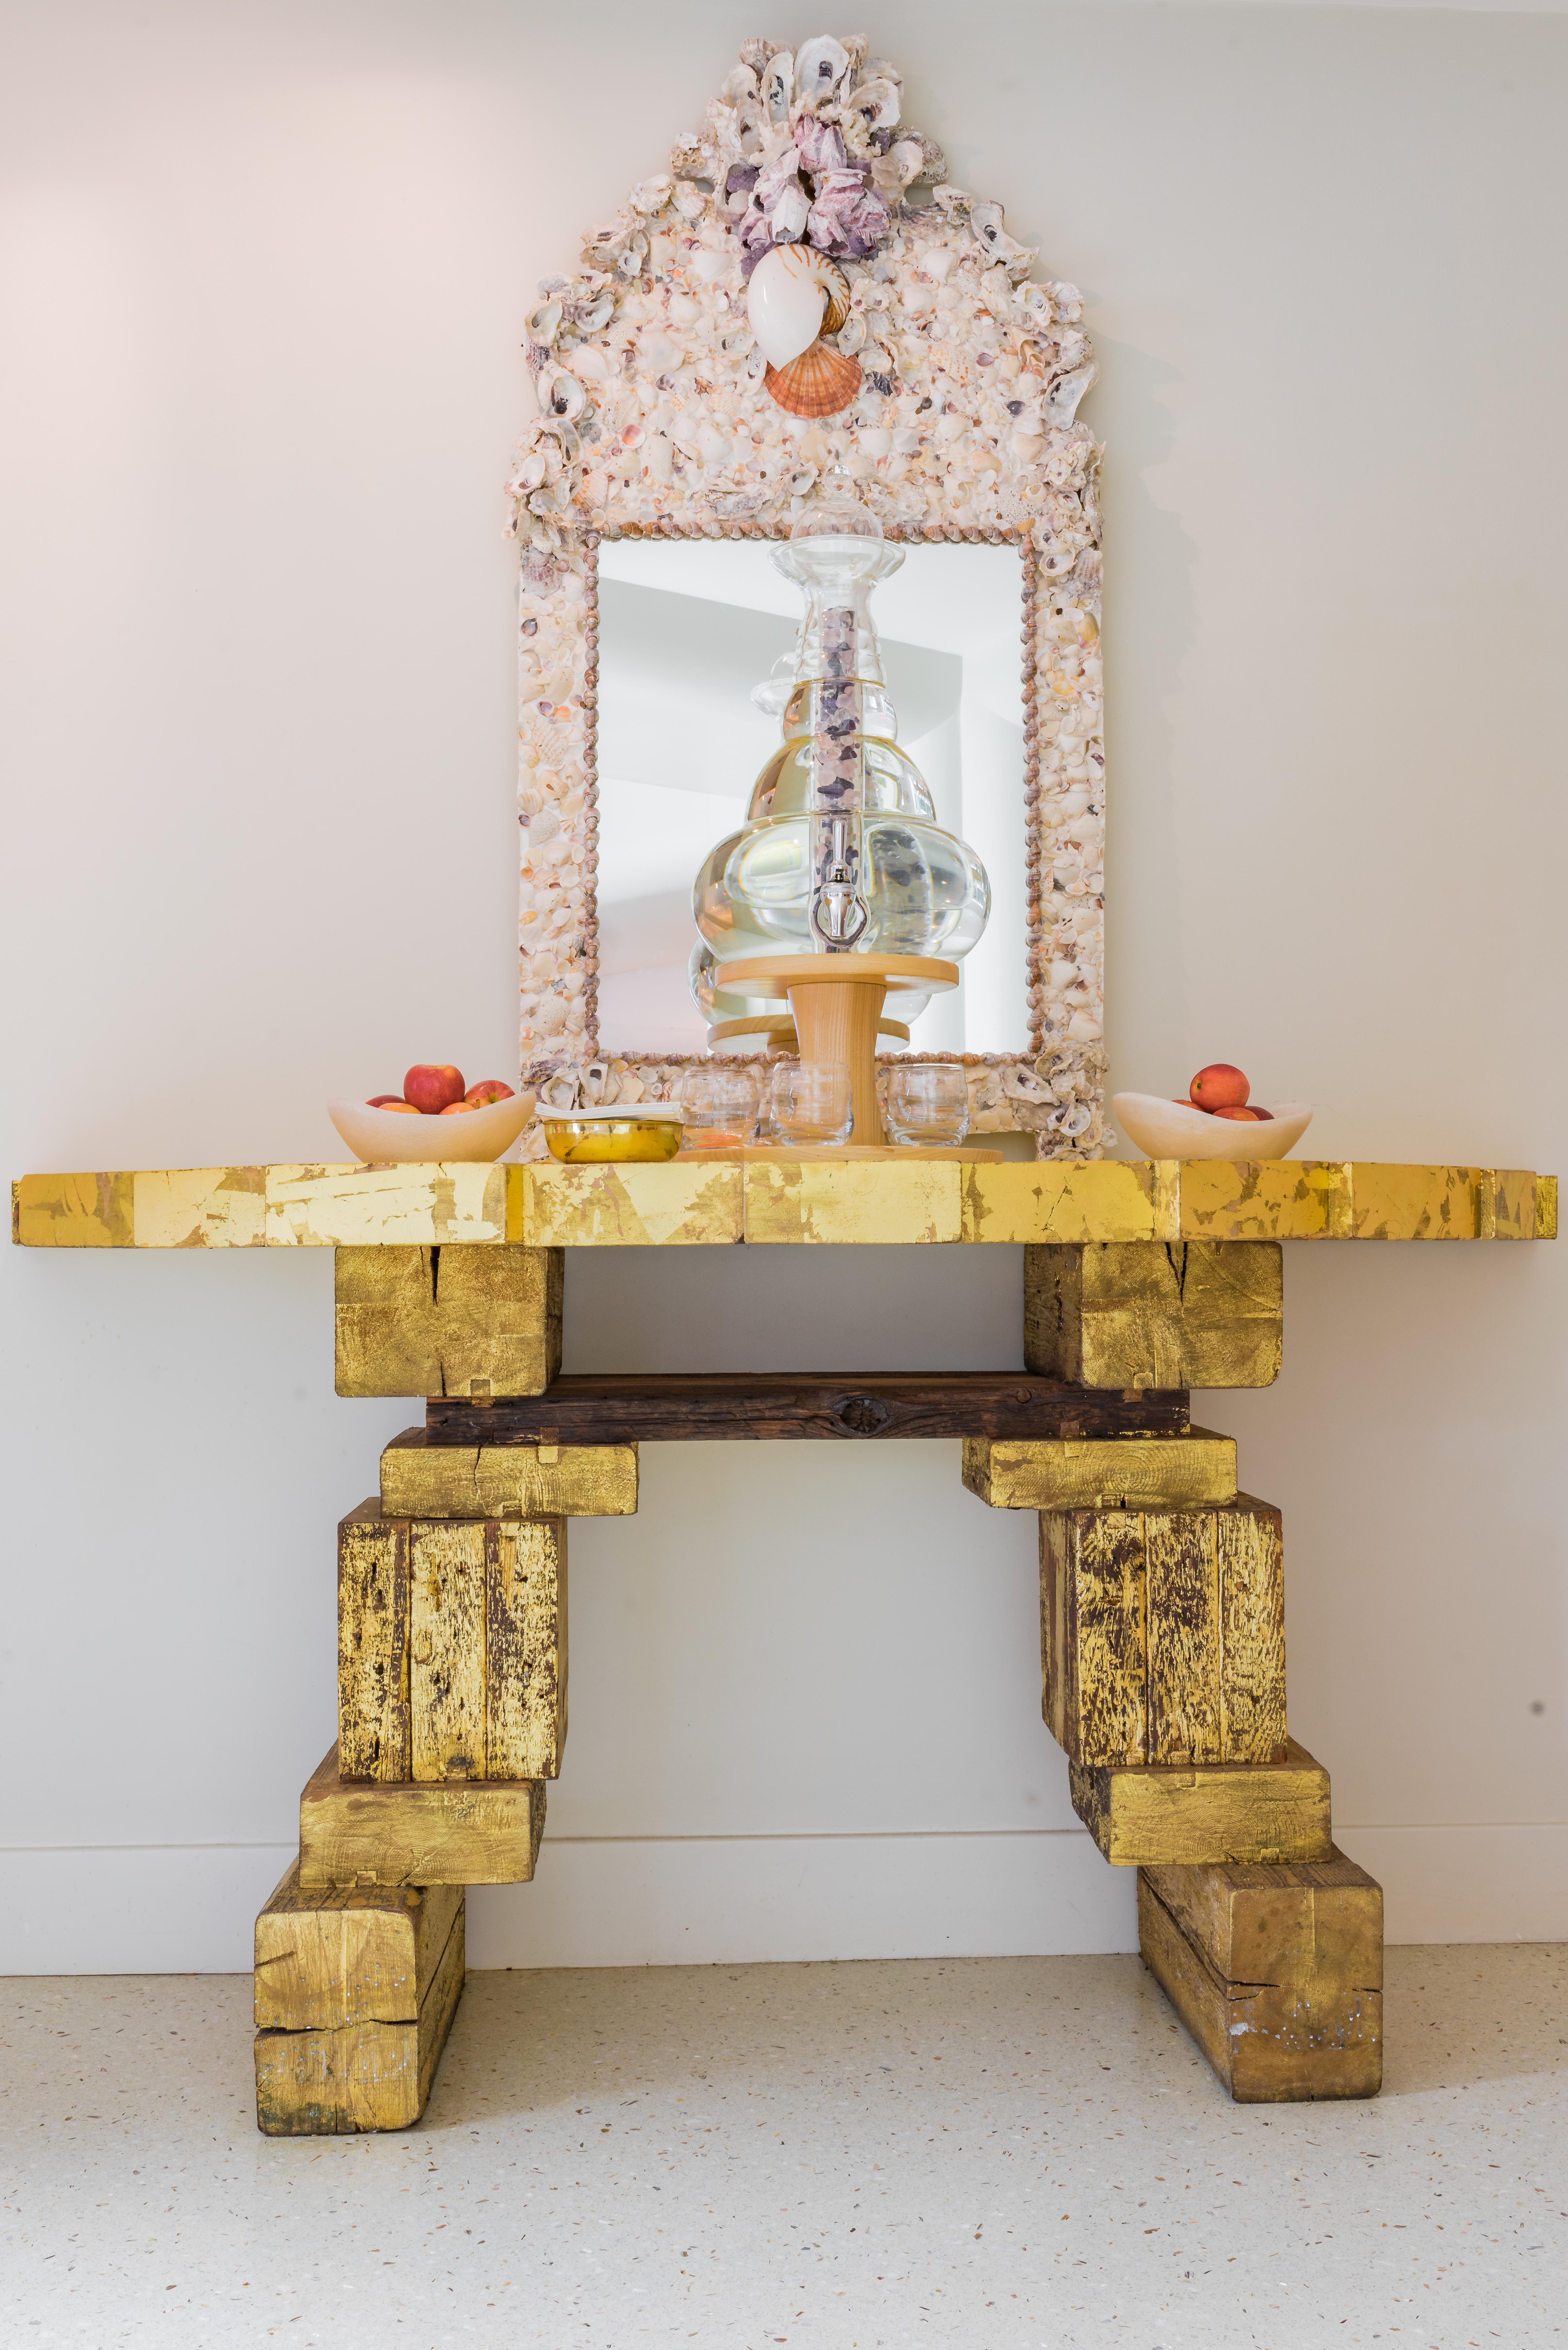 Rafael Calvo designed and handcrafted the luxurious and sculptural Gilt Demi-Lune Console Table using reclaimed 150-year-old Douglas fir beams he salvaged from Manhattan townhomes that would have been taken to a landfill. Rafael assembled the